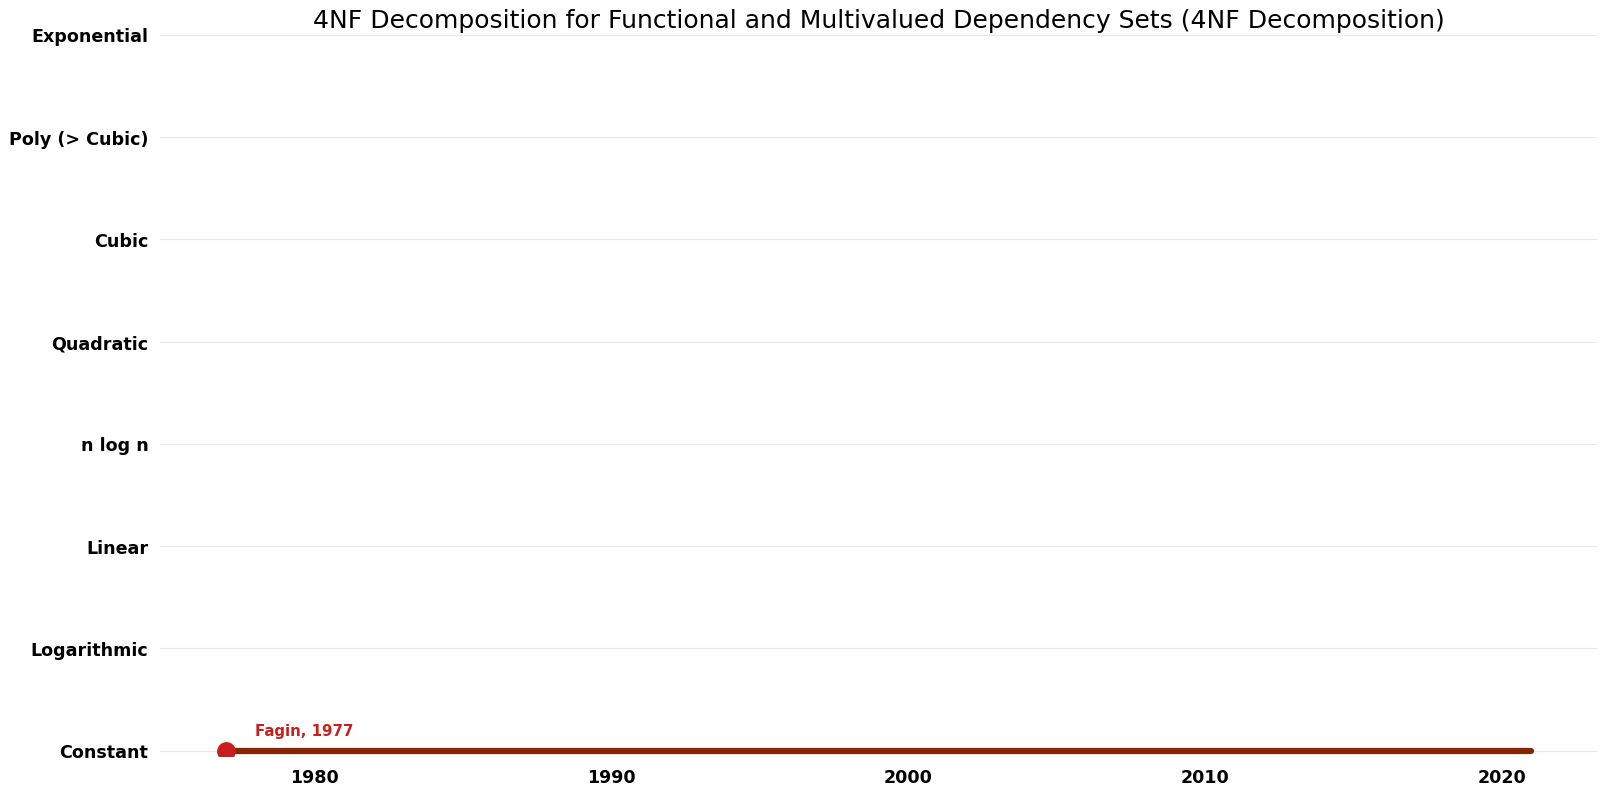 File:4NF Decomposition - 4NF Decomposition for Functional and Multivalued Dependency Sets - Space.png